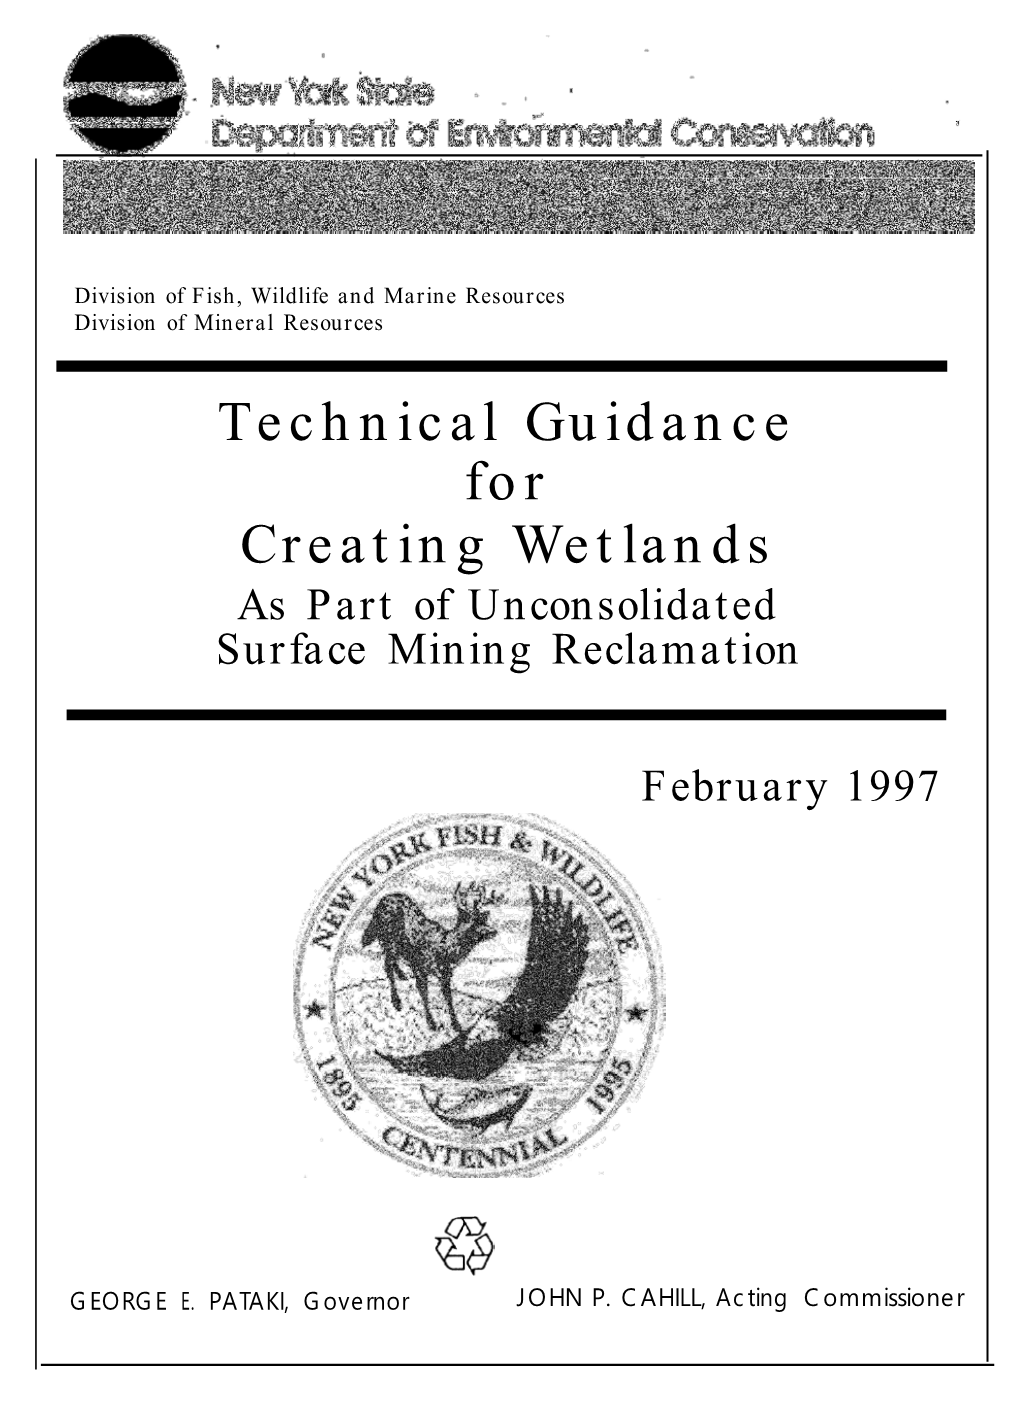 Technical Guidance for Creating Wetlands As Part of Unconsolidated Surface Mining Reclamation